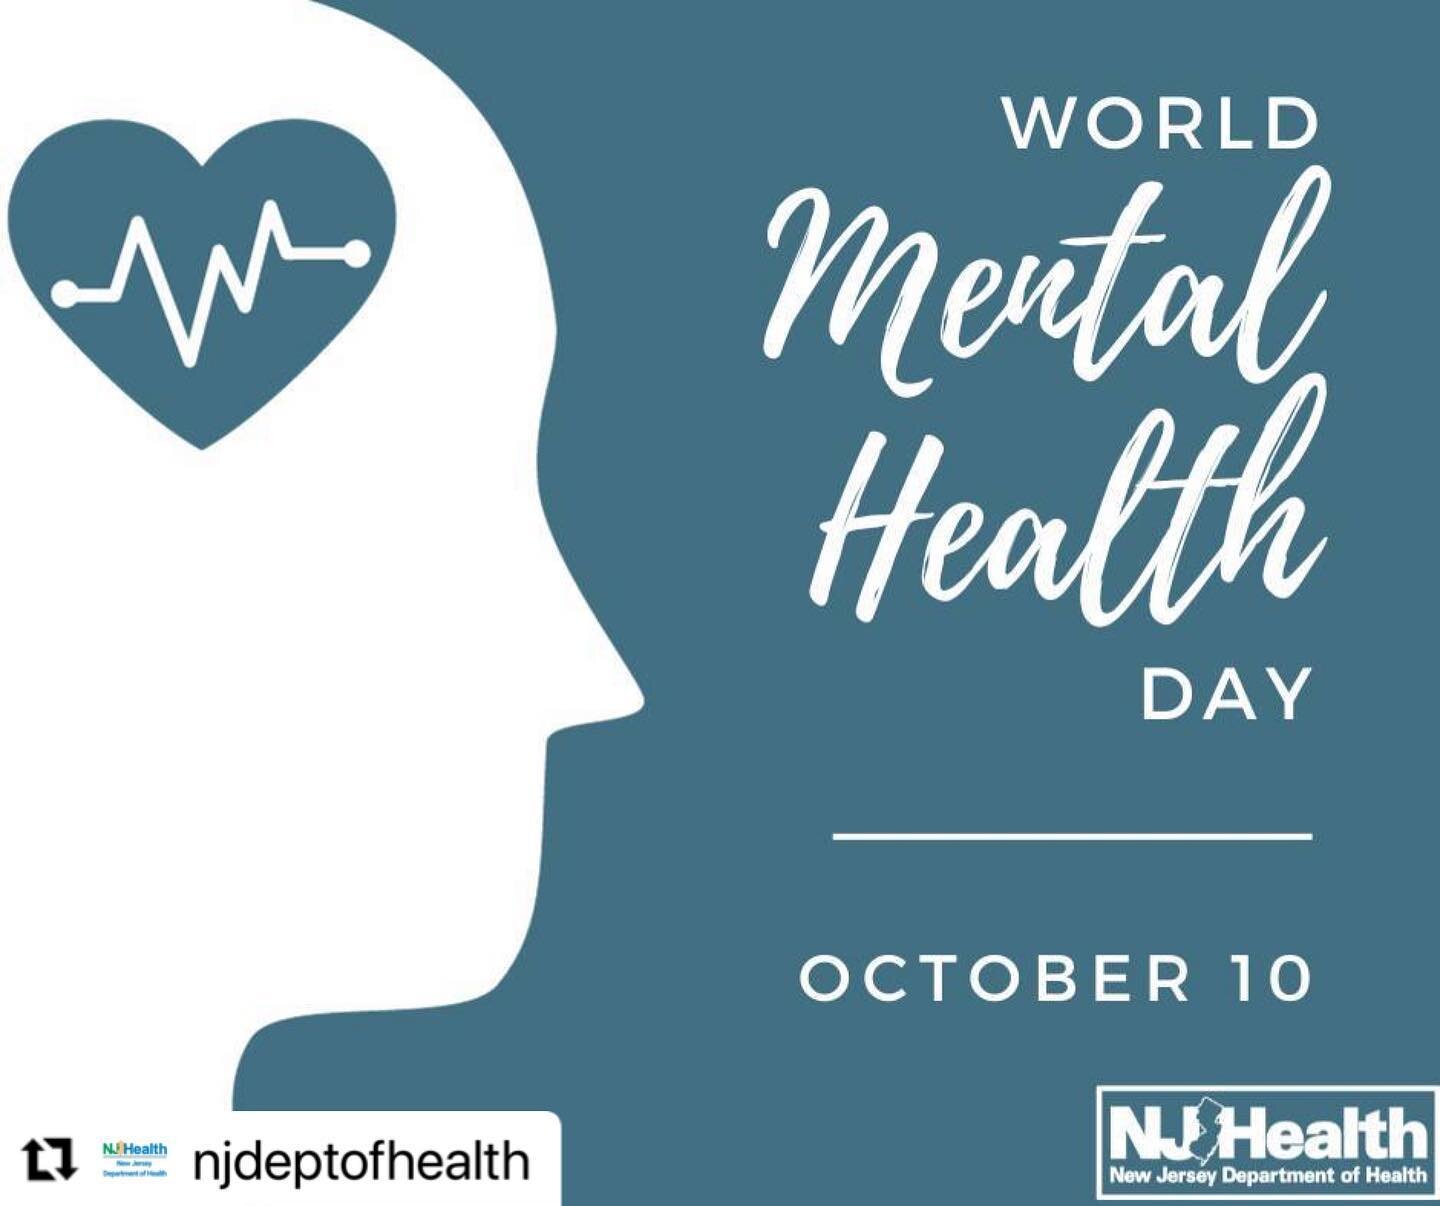 Today is World Mental Health Day, a day to recognize that mental health is a human right for all people. Learn more: www.who.int/campaigns/world-mental-health-day/2023 #HealthierNJ #MentalHealth